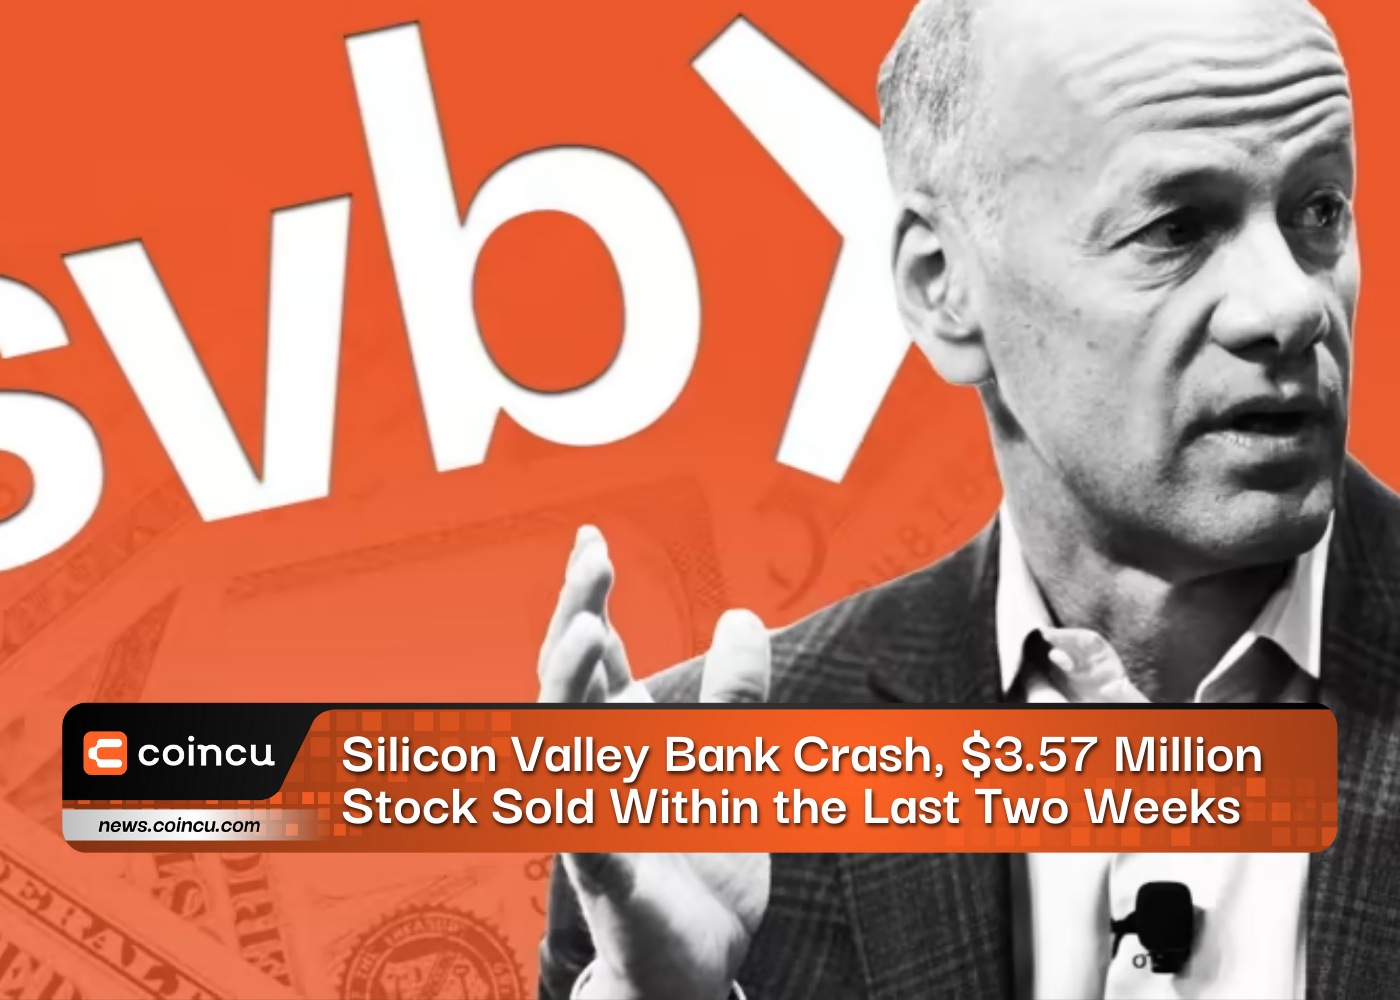 Silicon Valley Bank Crash, $3.57 Million Stock Sold Within The Last Two Weeks